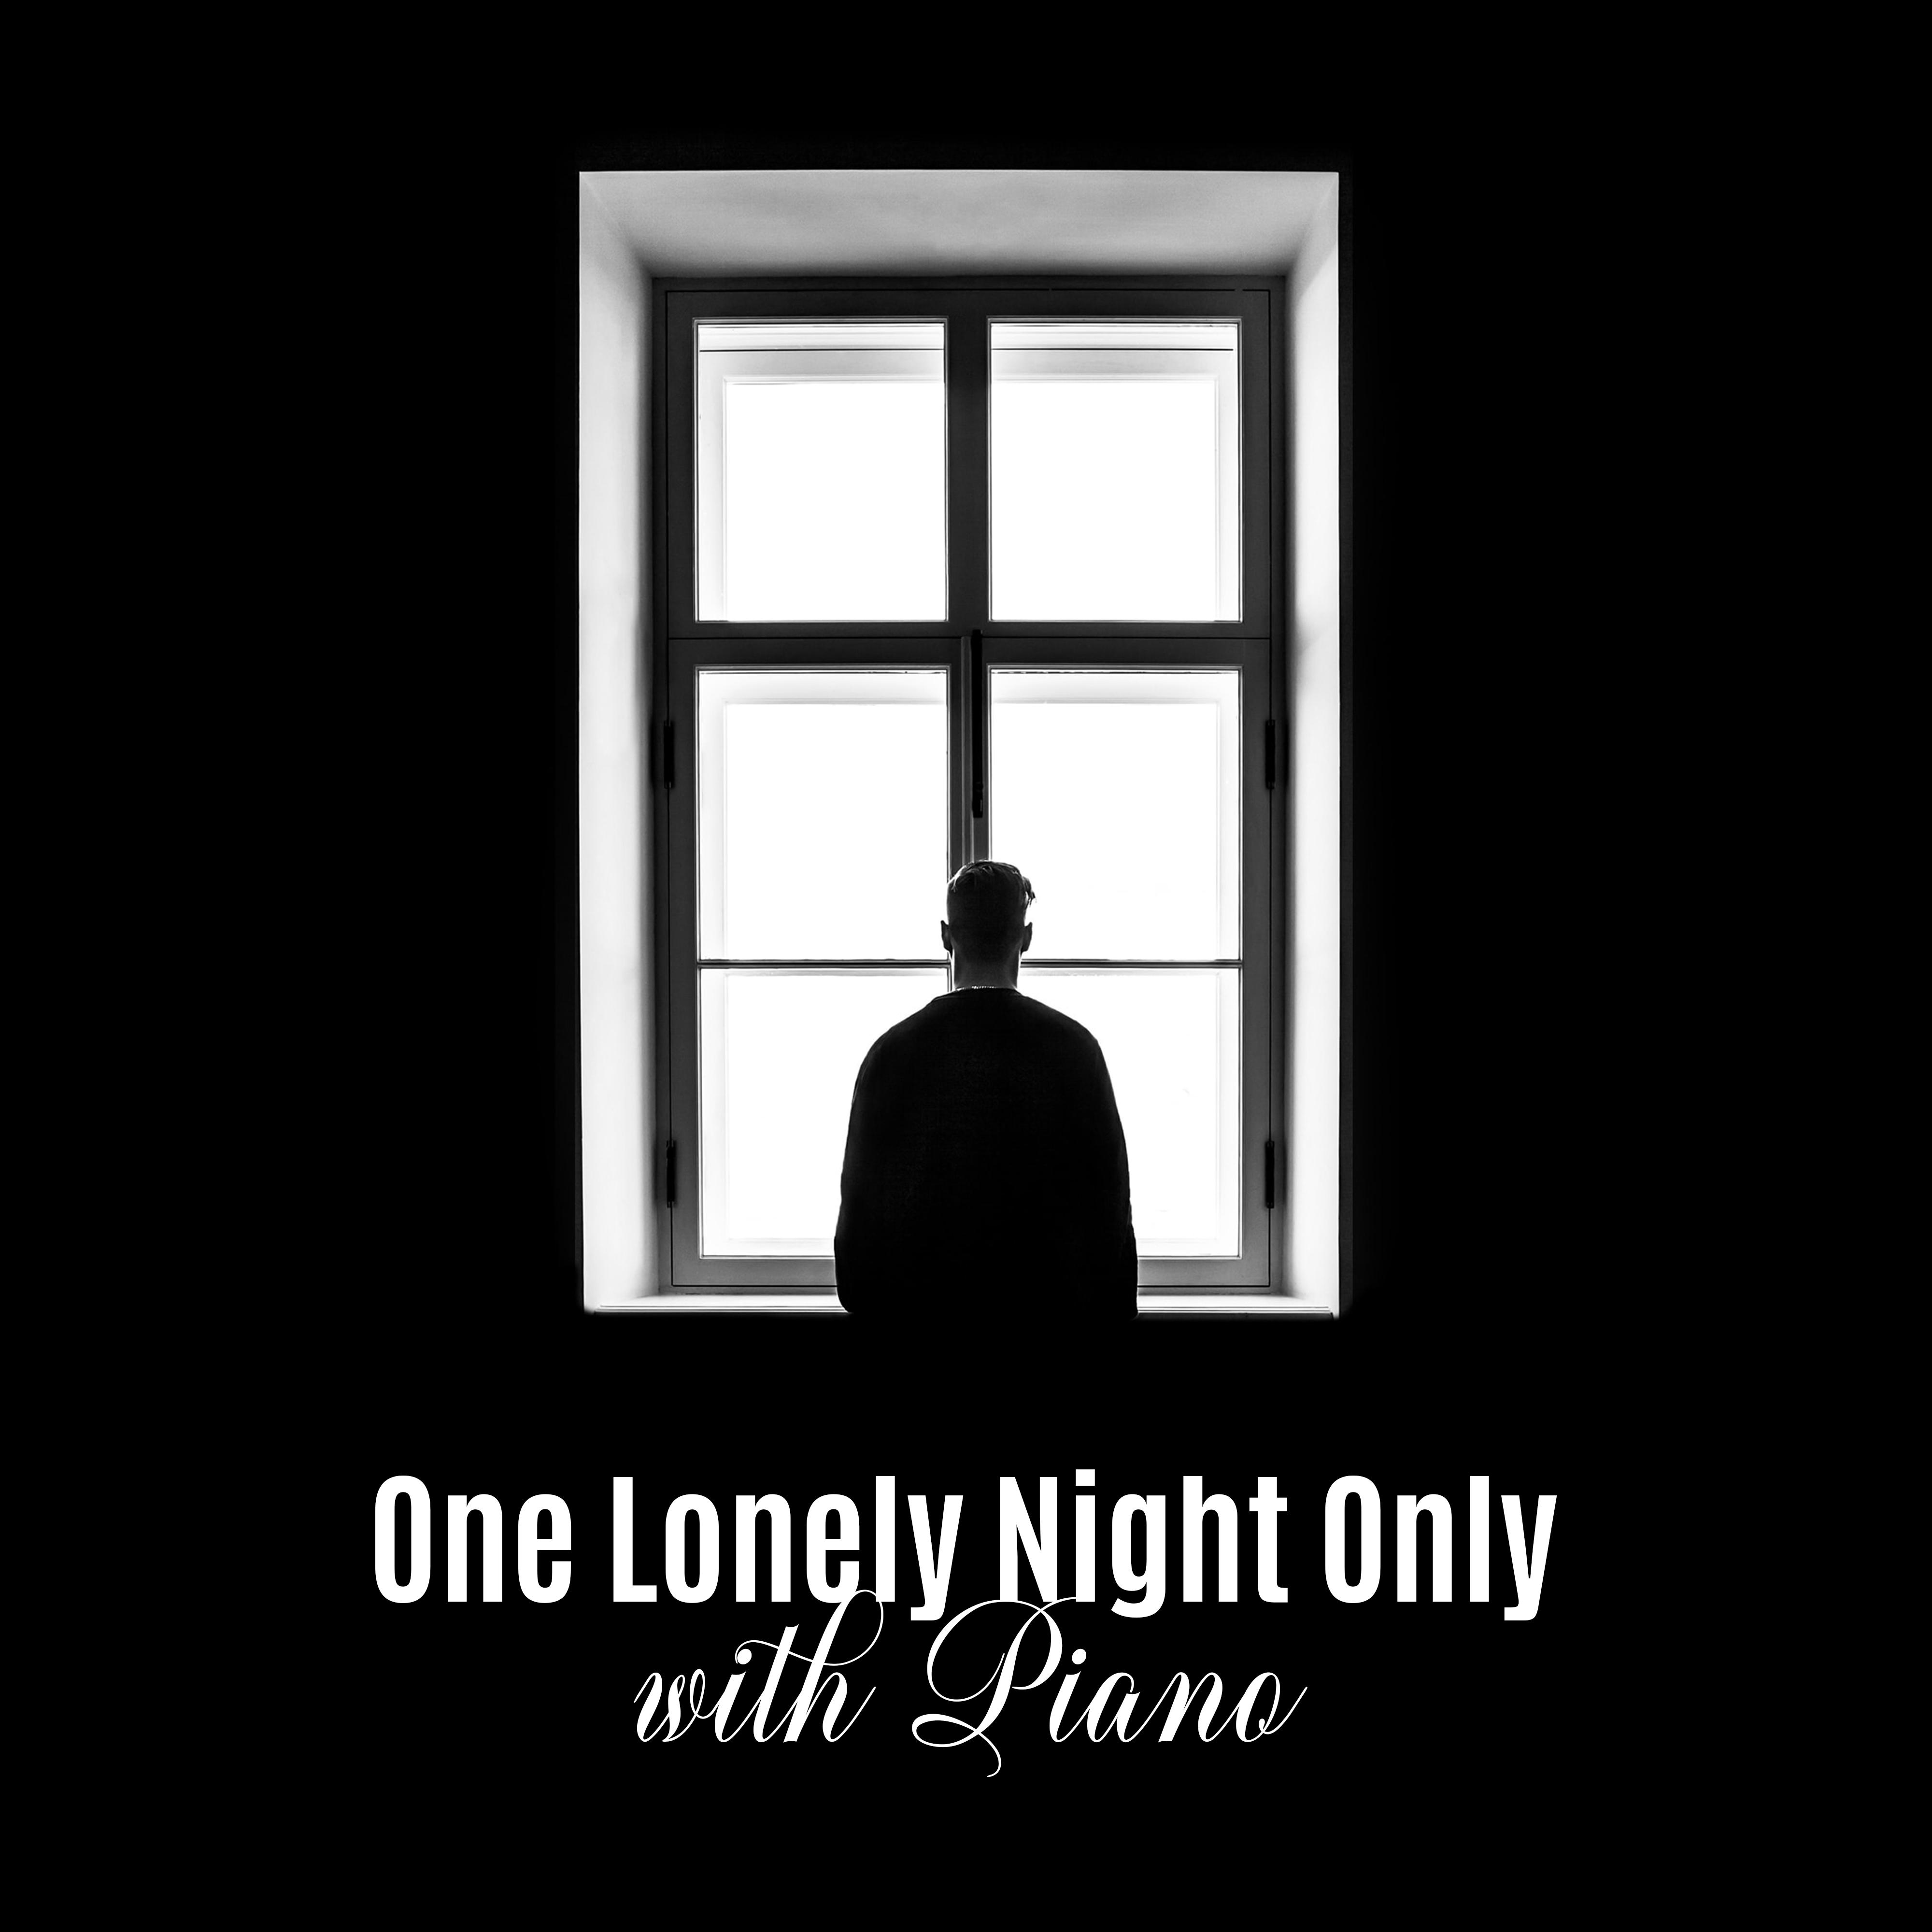 One Lonely Night Only with Piano: 2019 Most Nostalgic Piano Jazz Music for Sad Moments in Your Life, Couple’s Quiet Time, Longing for Someone Important to You